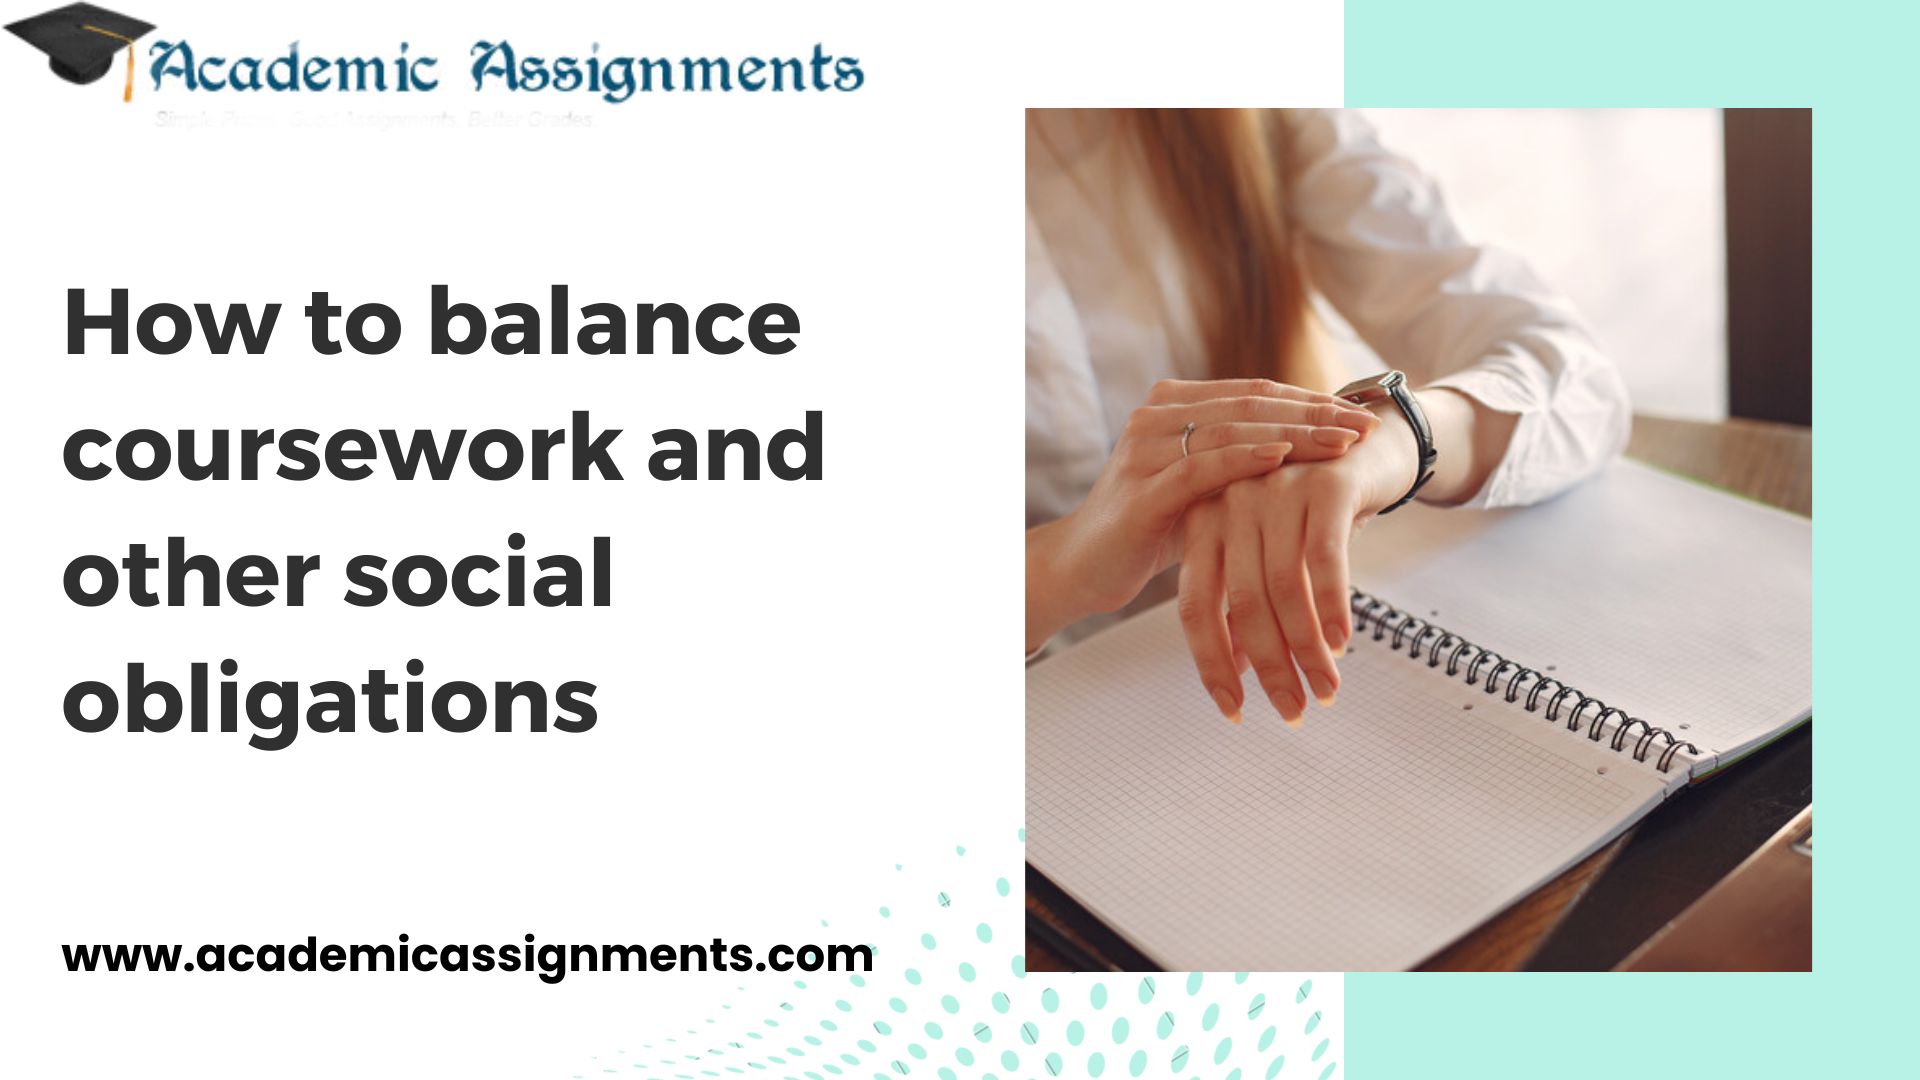 How to balance coursework and other social obligations